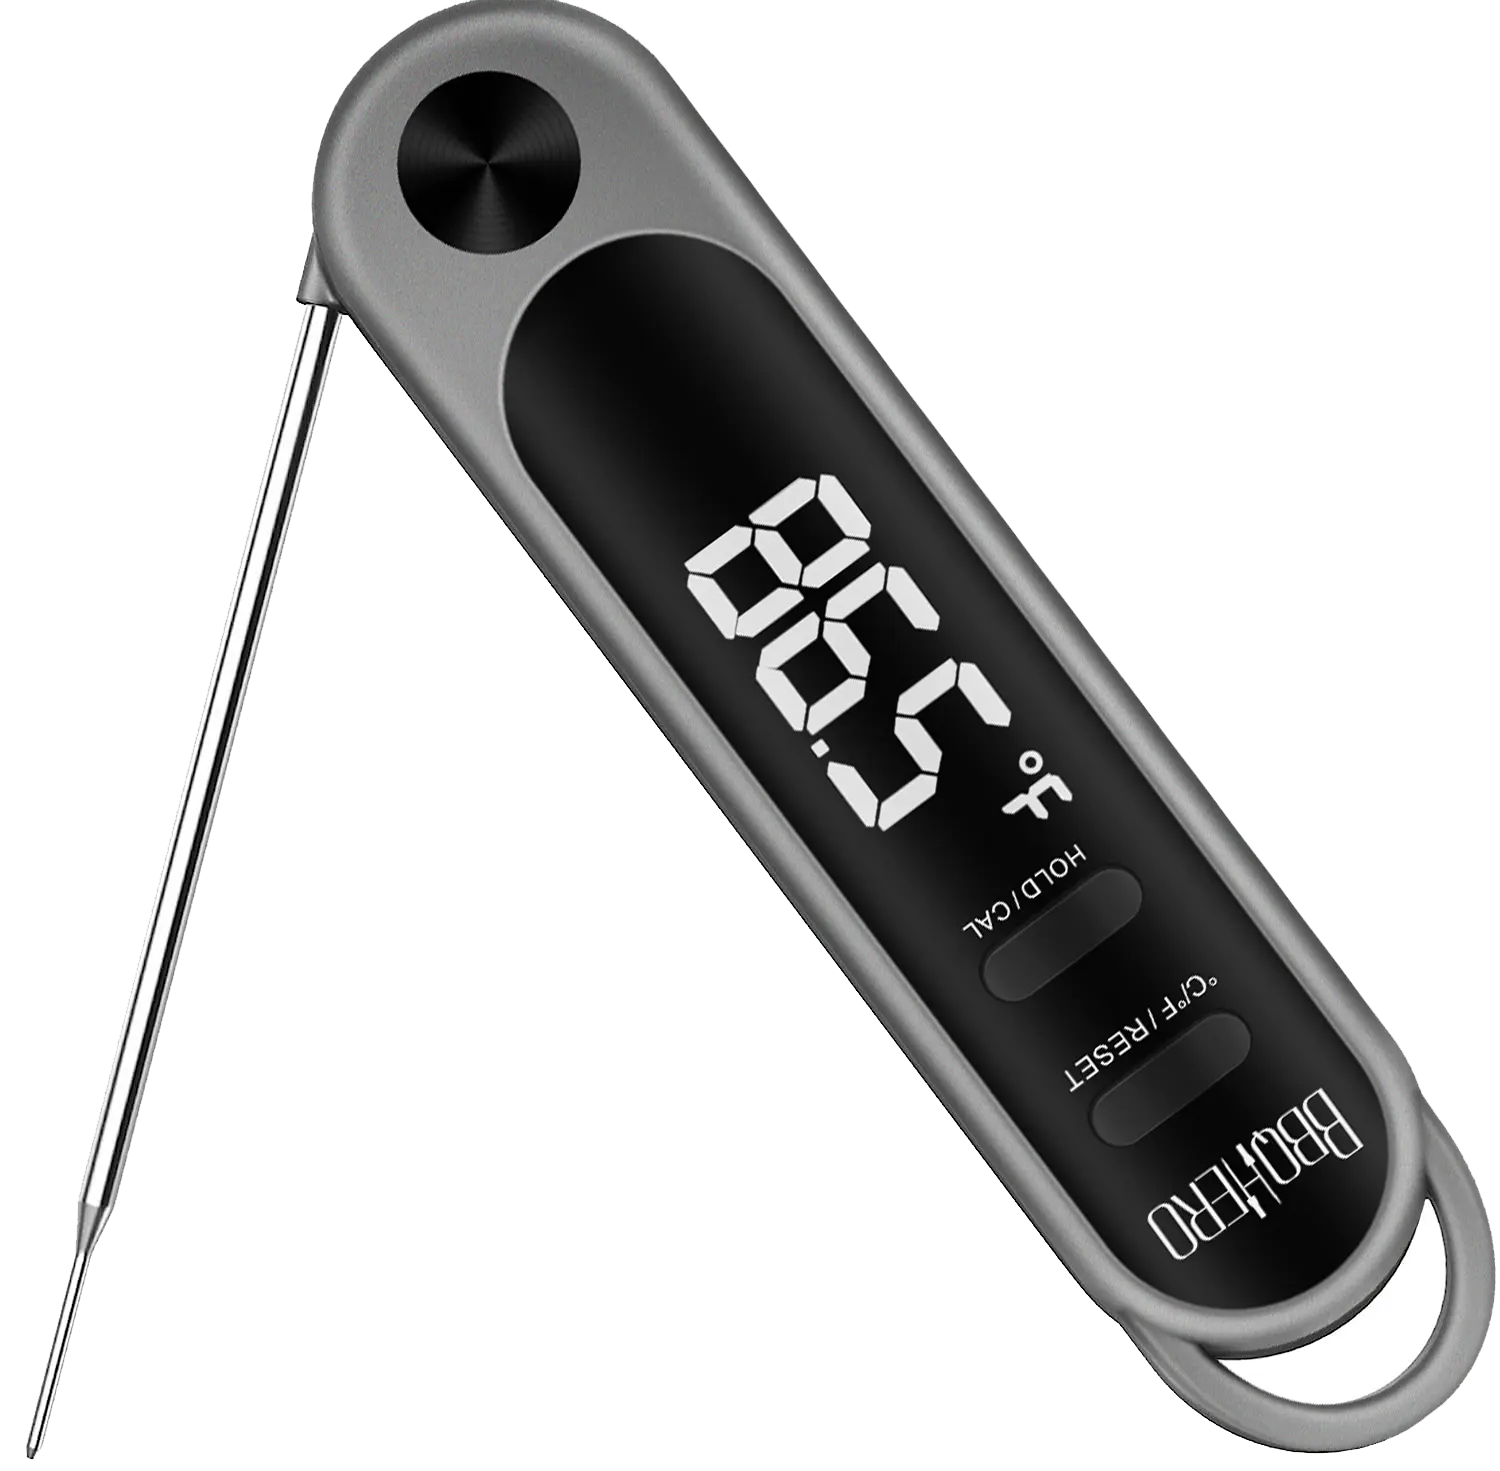 High Quality Digital Portable Barbecue Meat Probe Thermometer